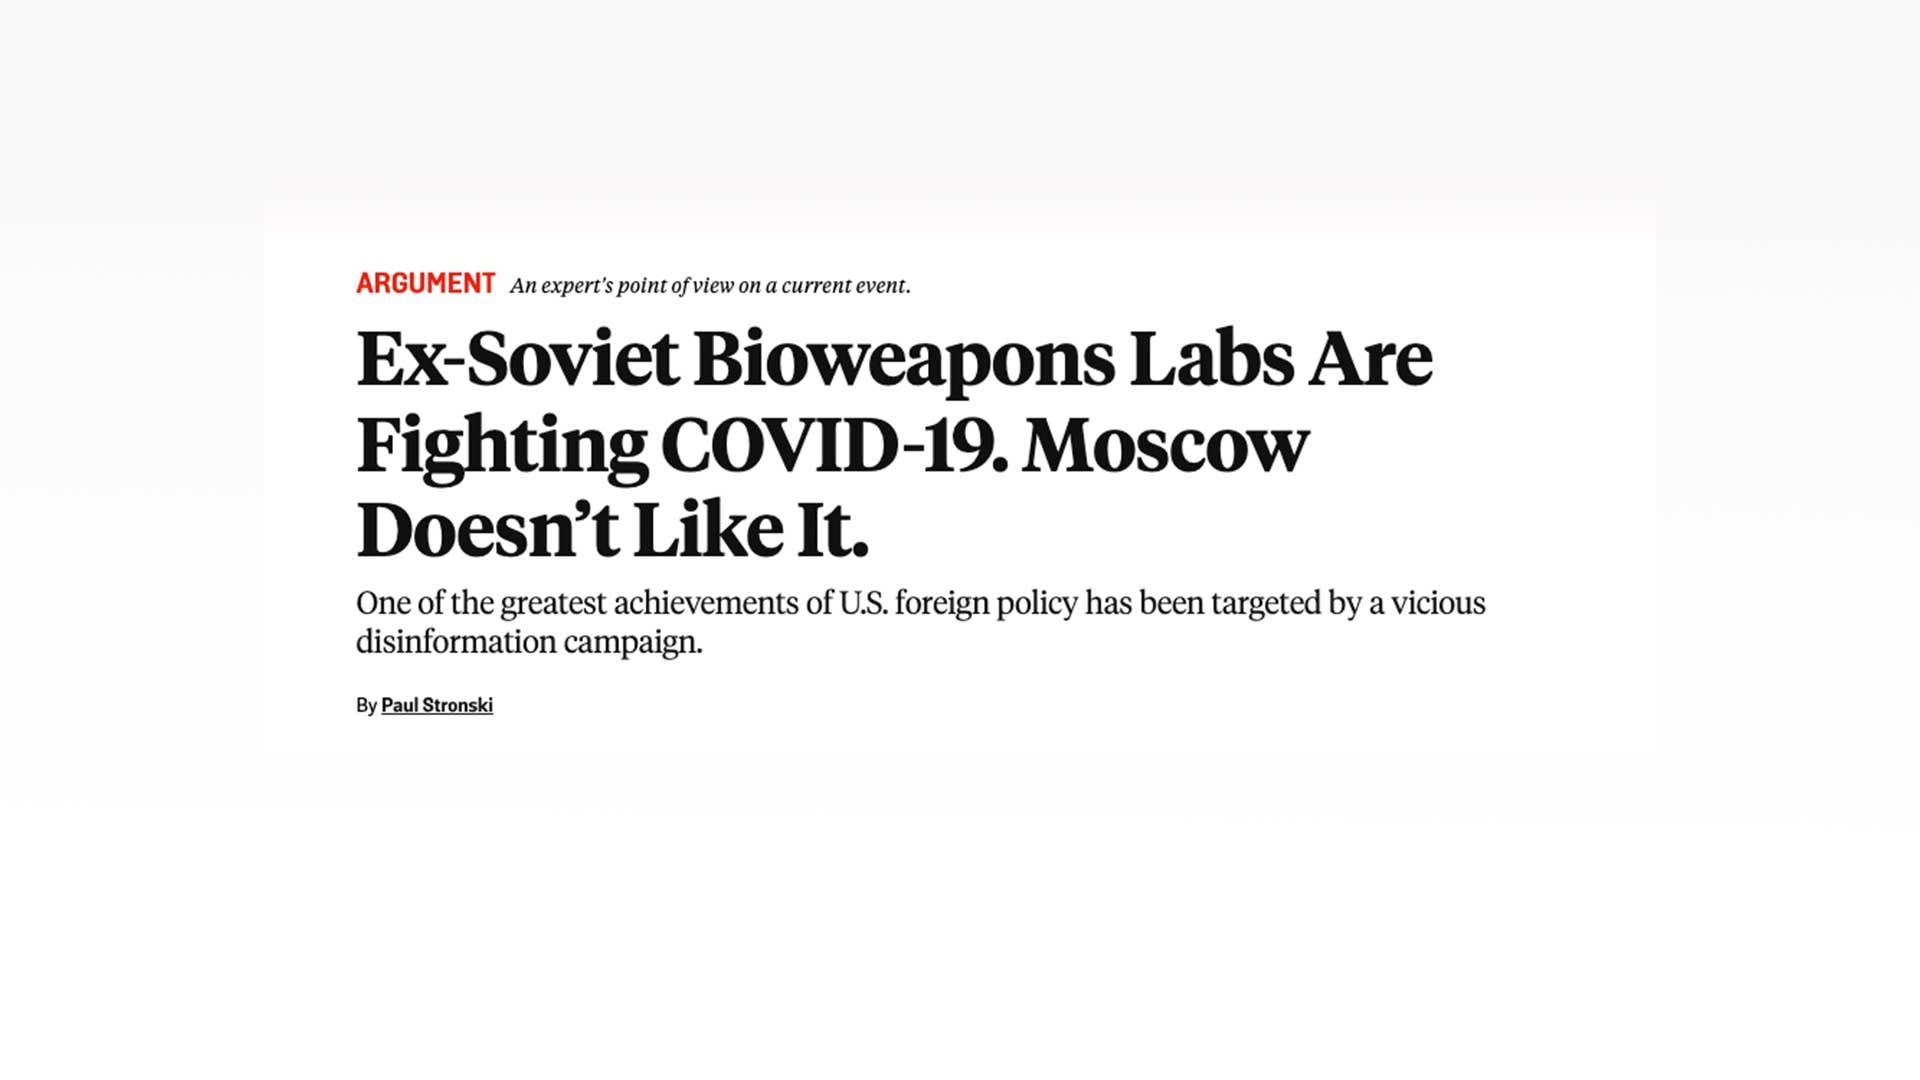 Link to article about Soviet Disinformation Campaign about the Ex-Soviet Bioweapons Labs.